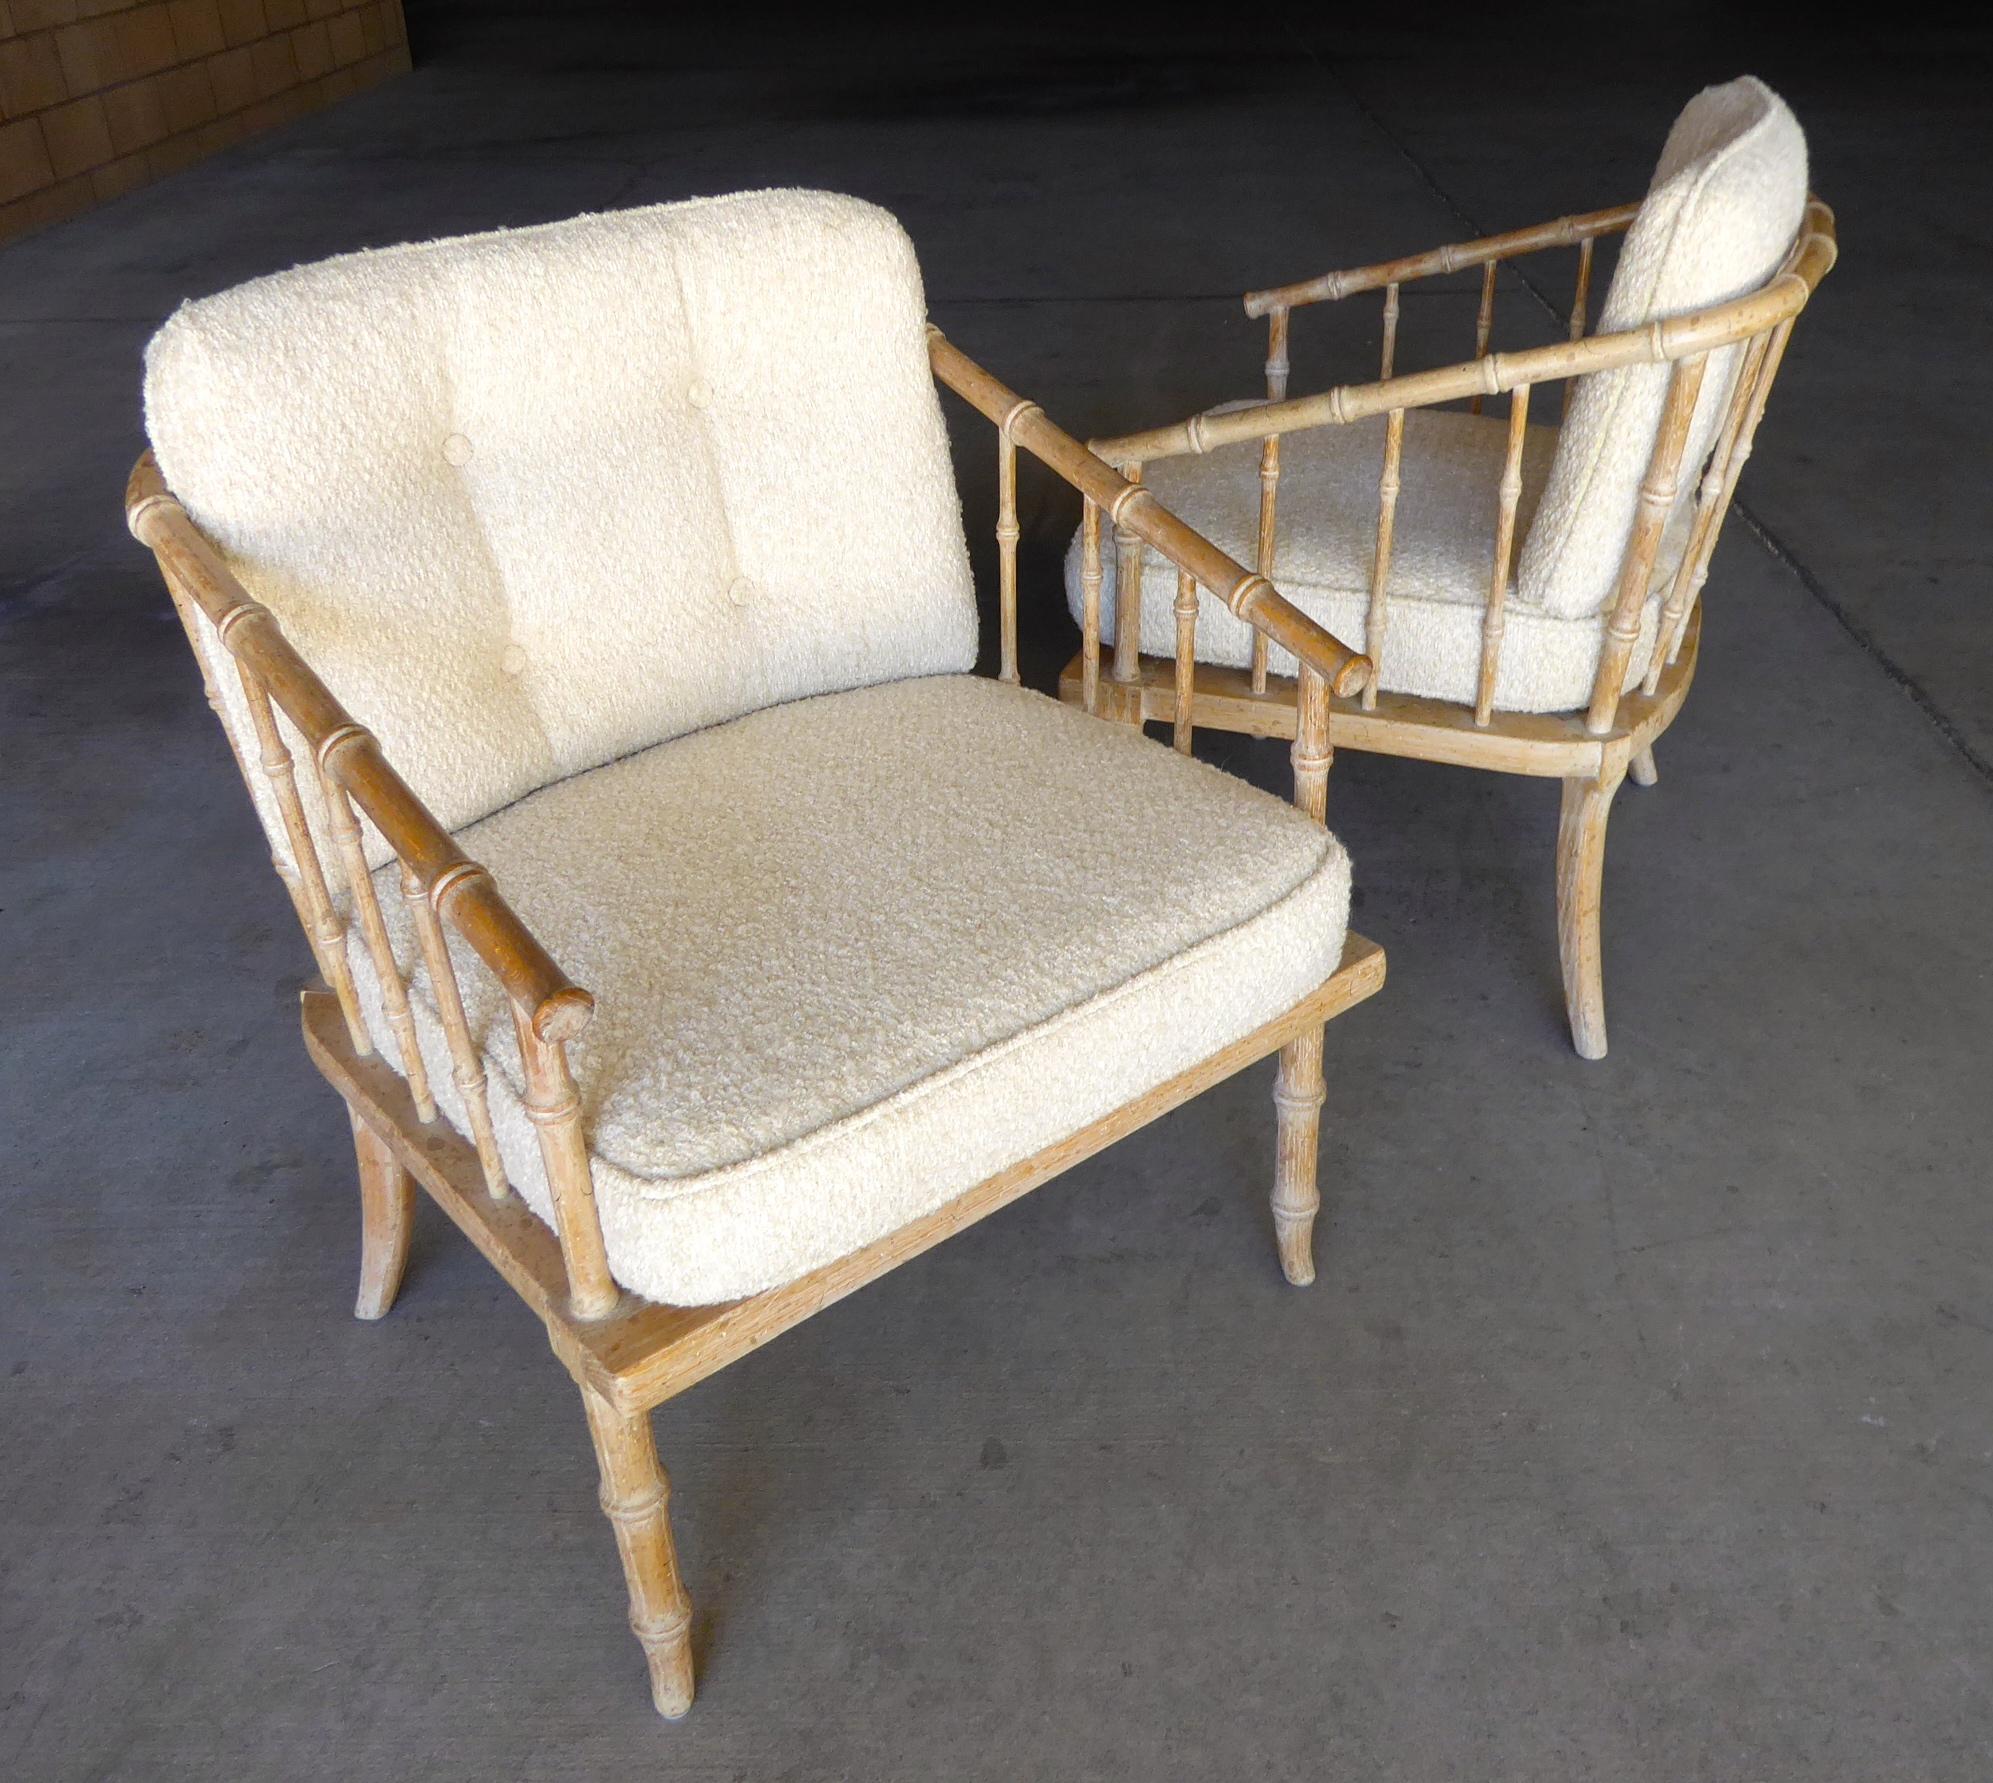 A pair of faux-bamboo carved oak armchairs with a lime-washed finish, attributed to McGuire, circa 1960s. The cushions have been newly reupholstered in a cream colored nubby boucle fabric.